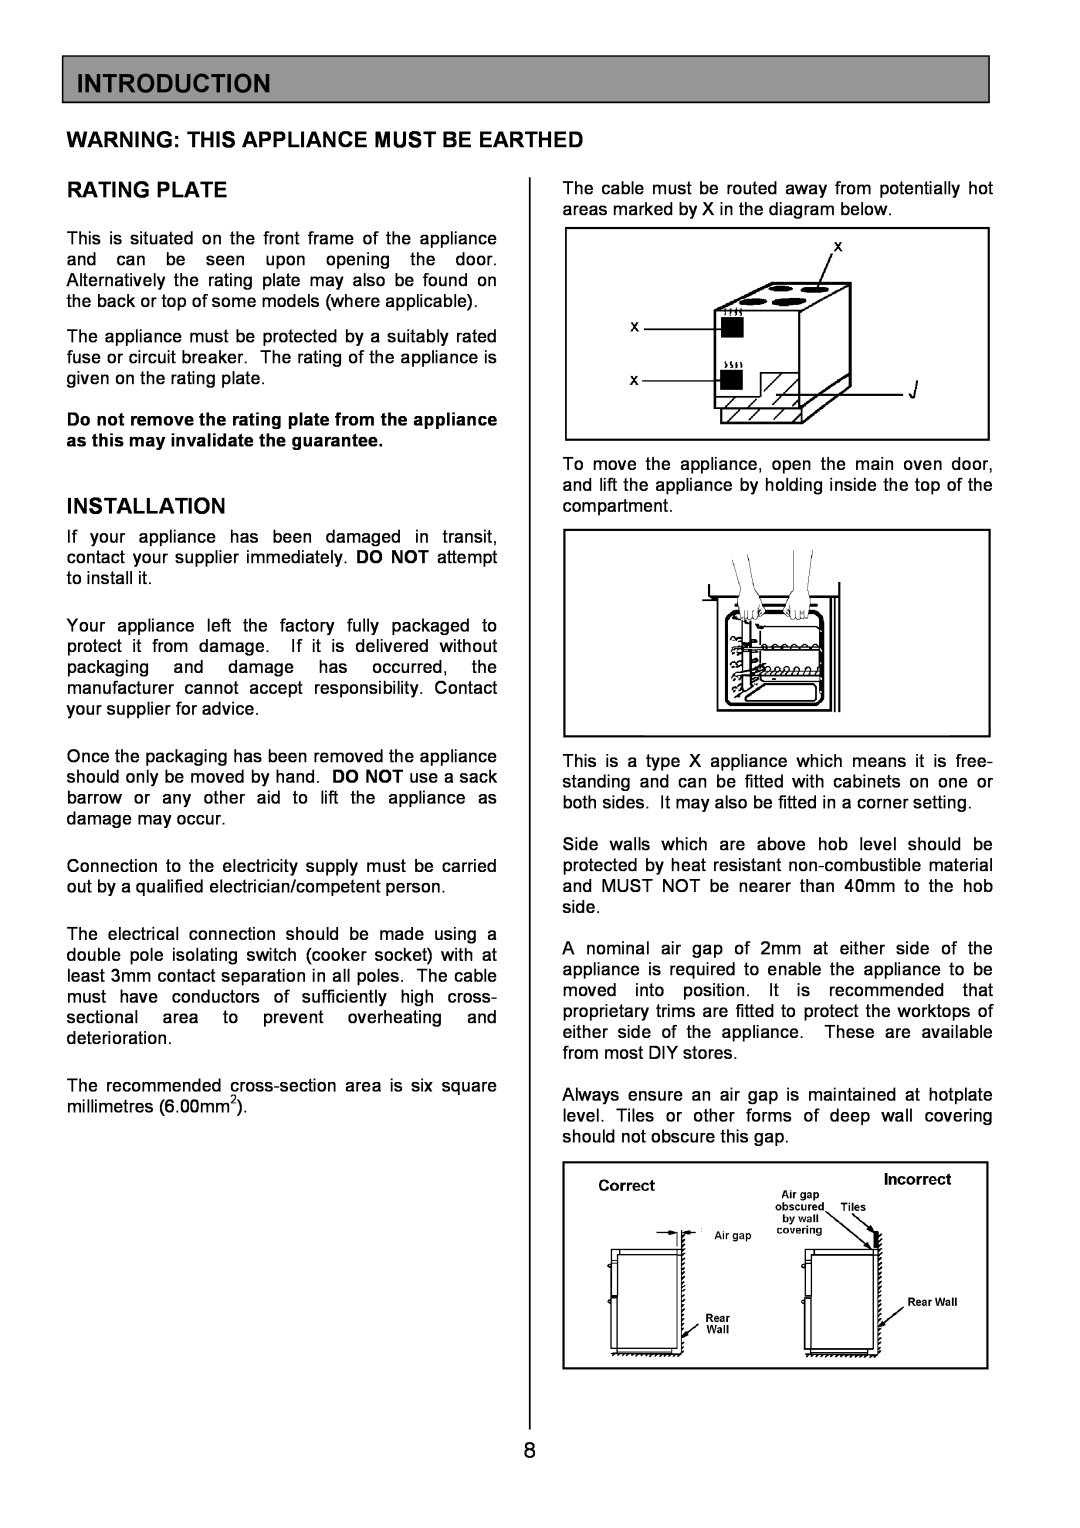 Zanussi ZCE 8021 manual Introduction, Warning This Appliance Must Be Earthed, Rating Plate, Installation 